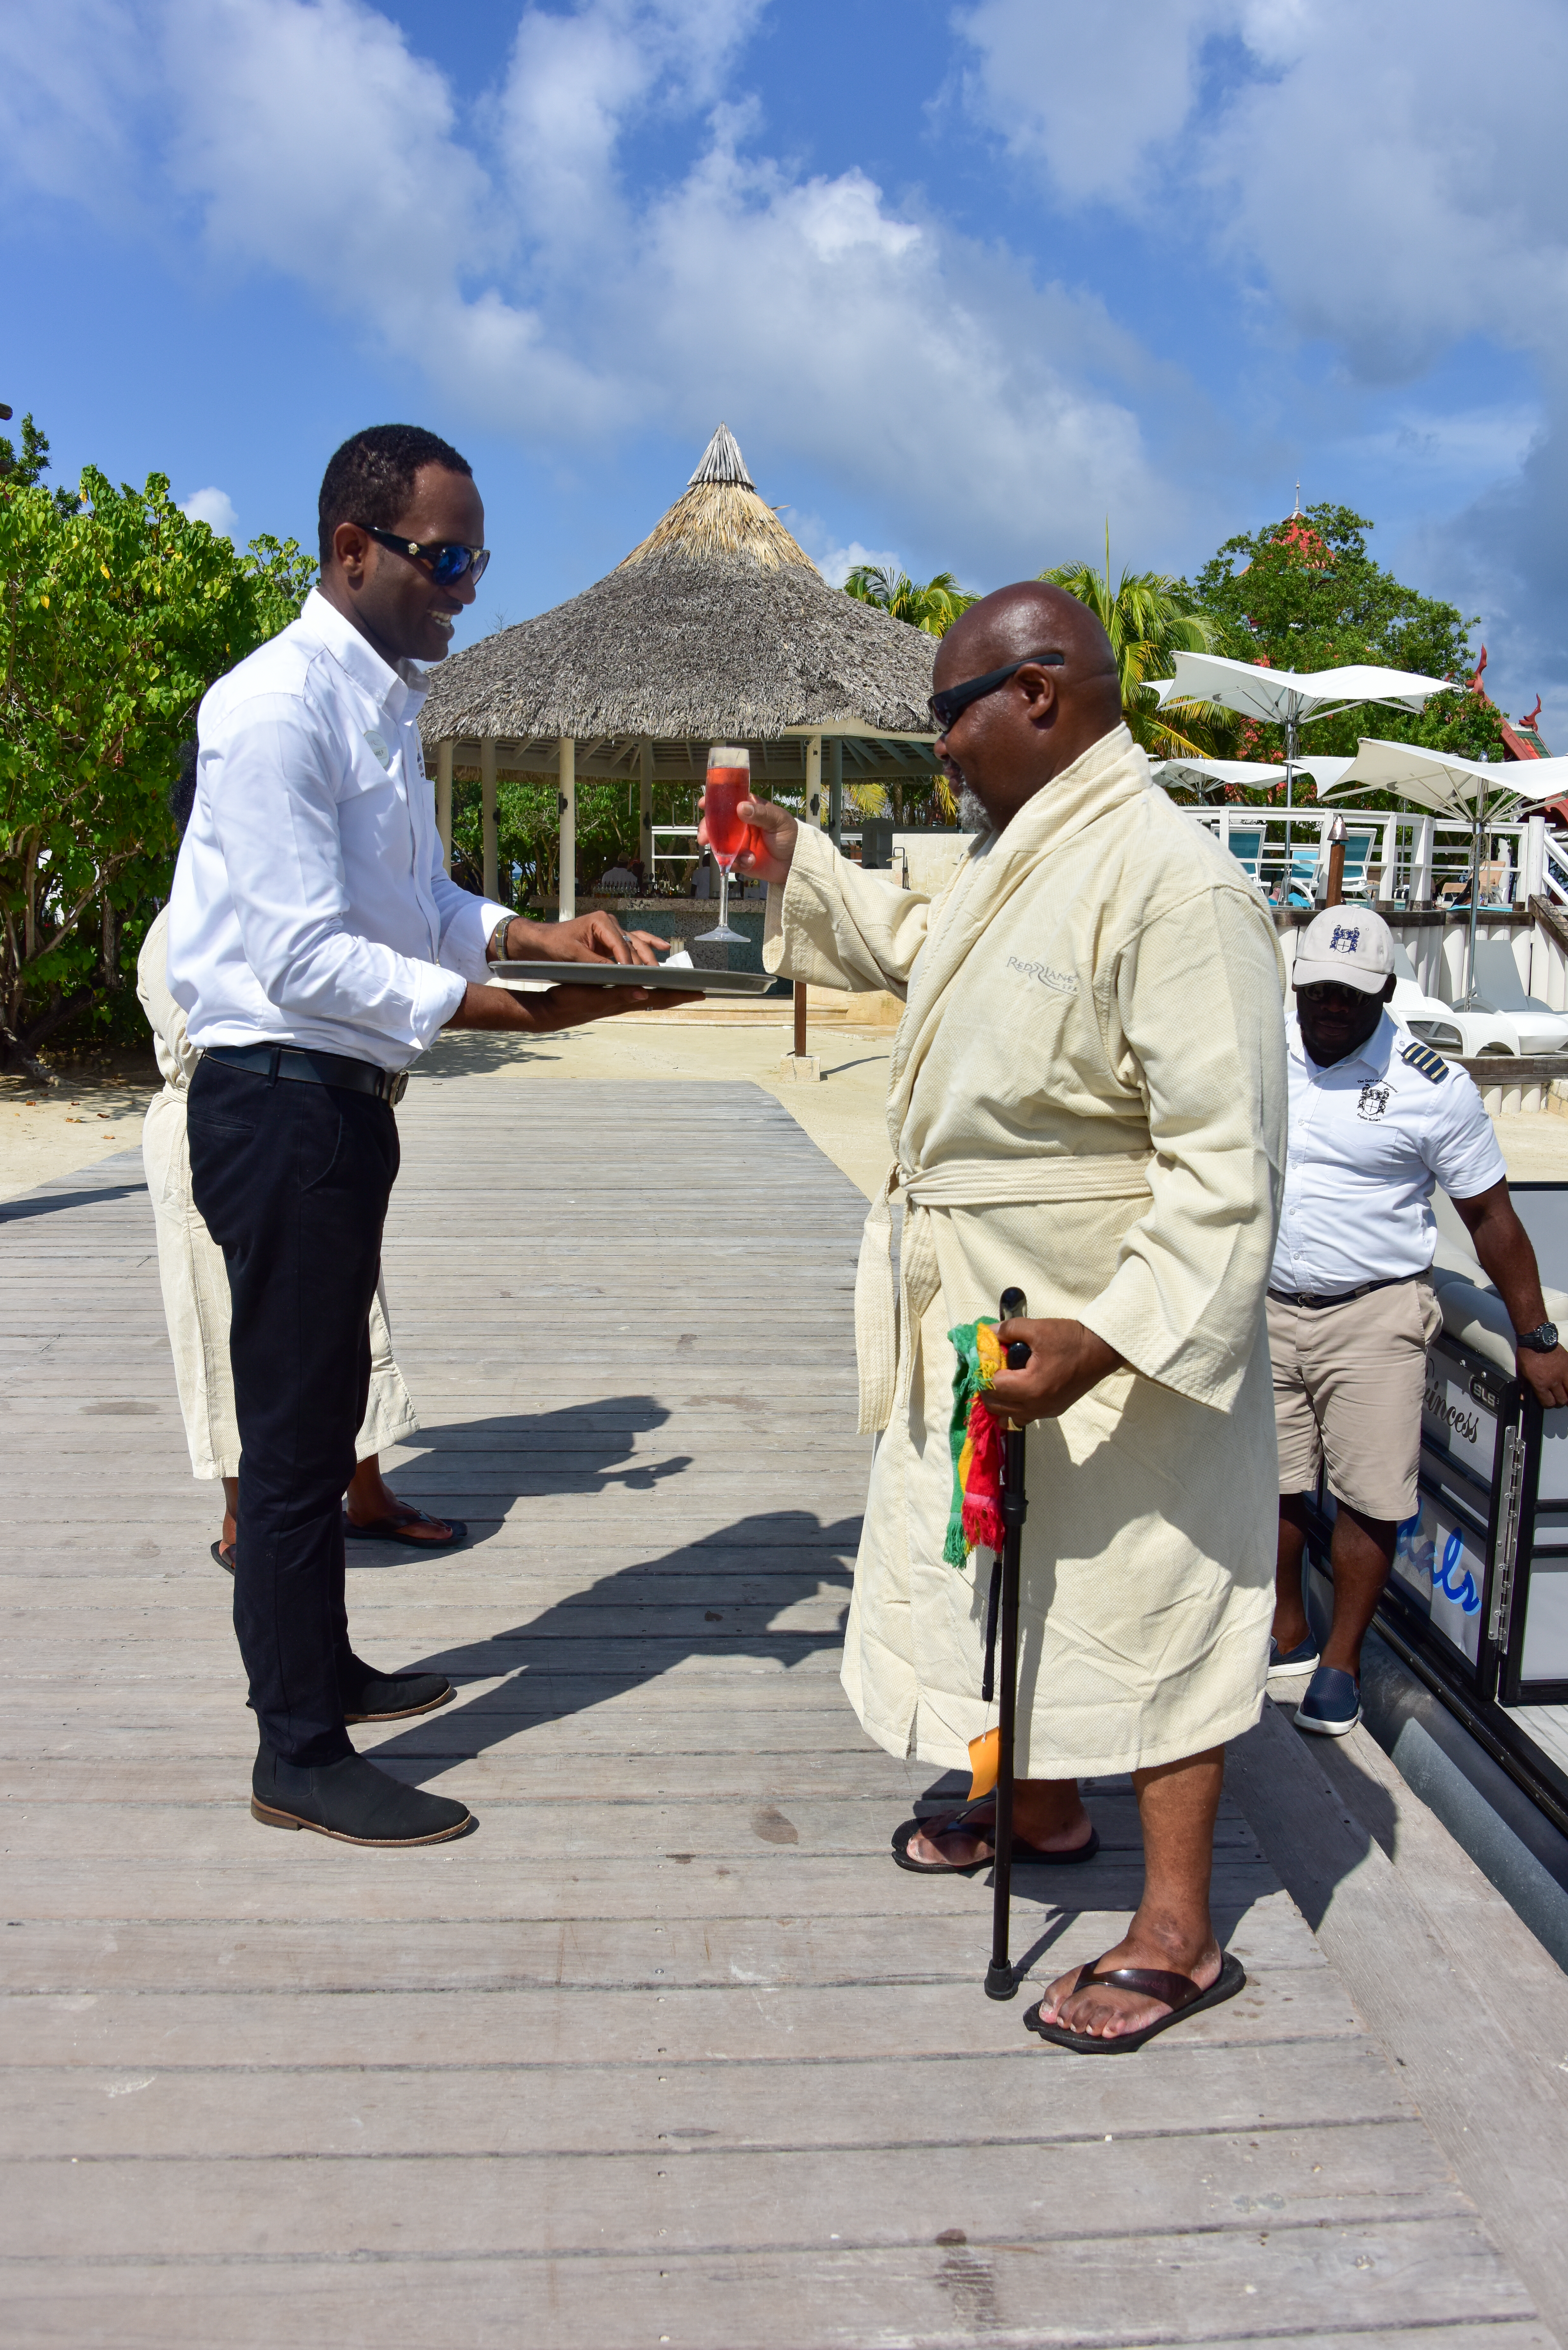 Herman Gordon accepts a drink from a waiter at Sandals Resorts in Jamaica after students at the University of Bristol crowdfunded the money for their flights